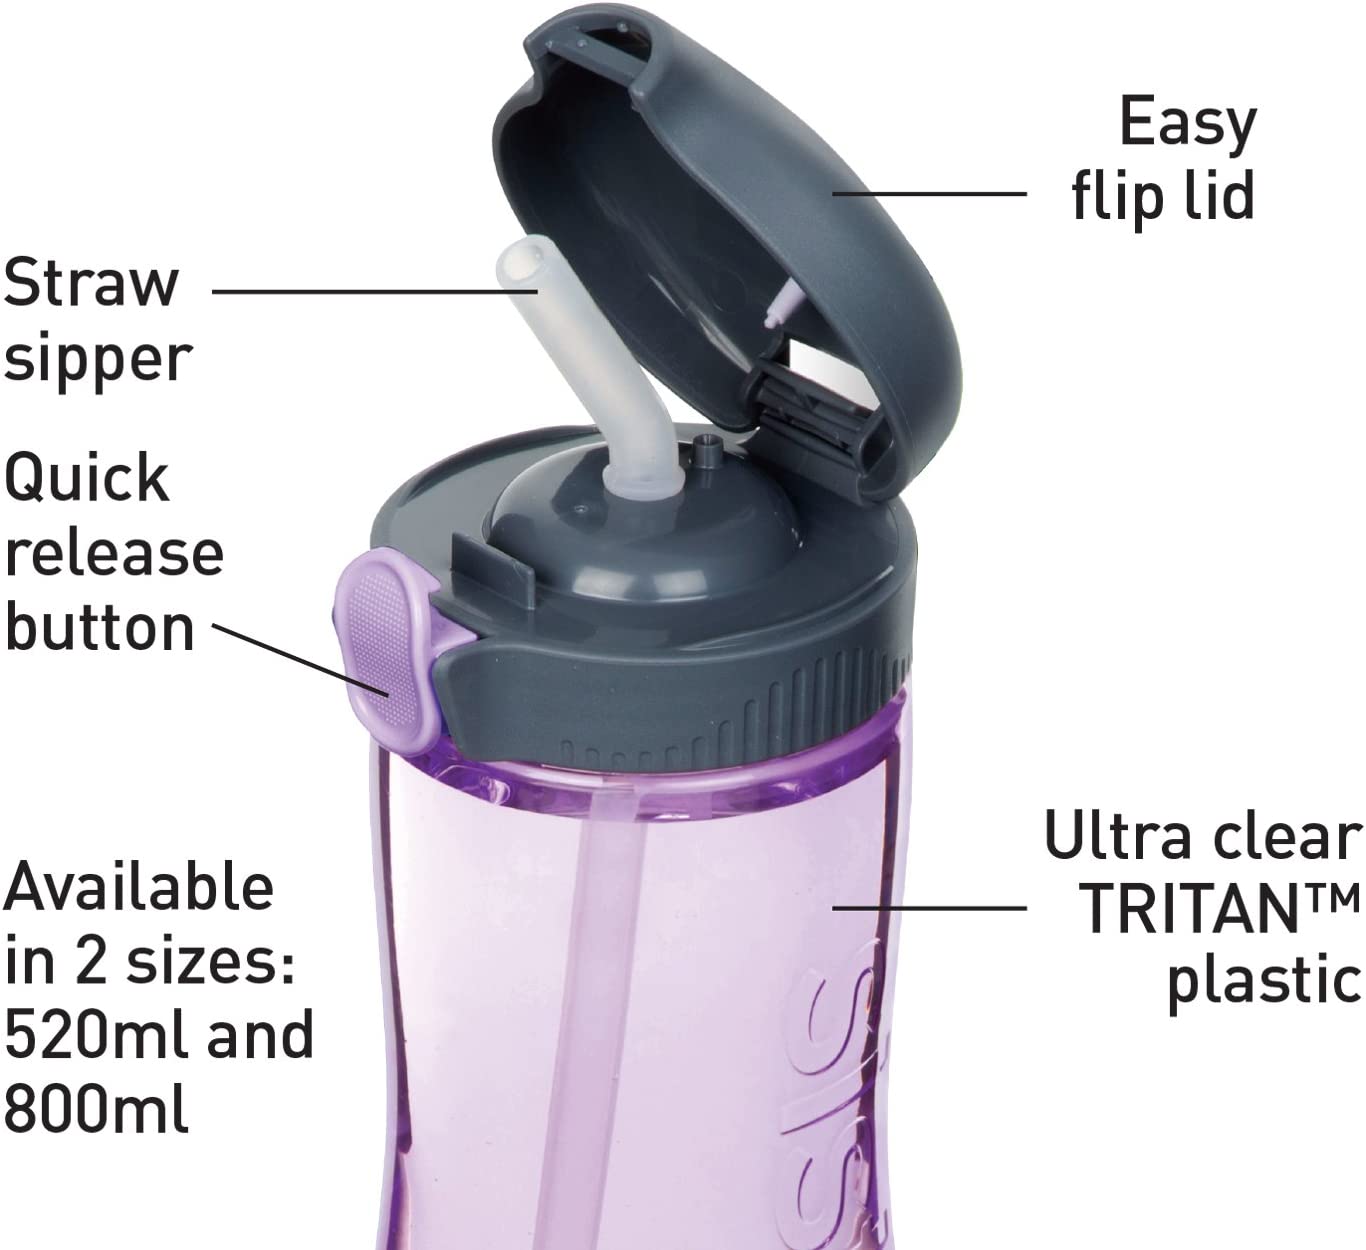 Sistema hydrate  Quick Flip bottle with straw 800ml